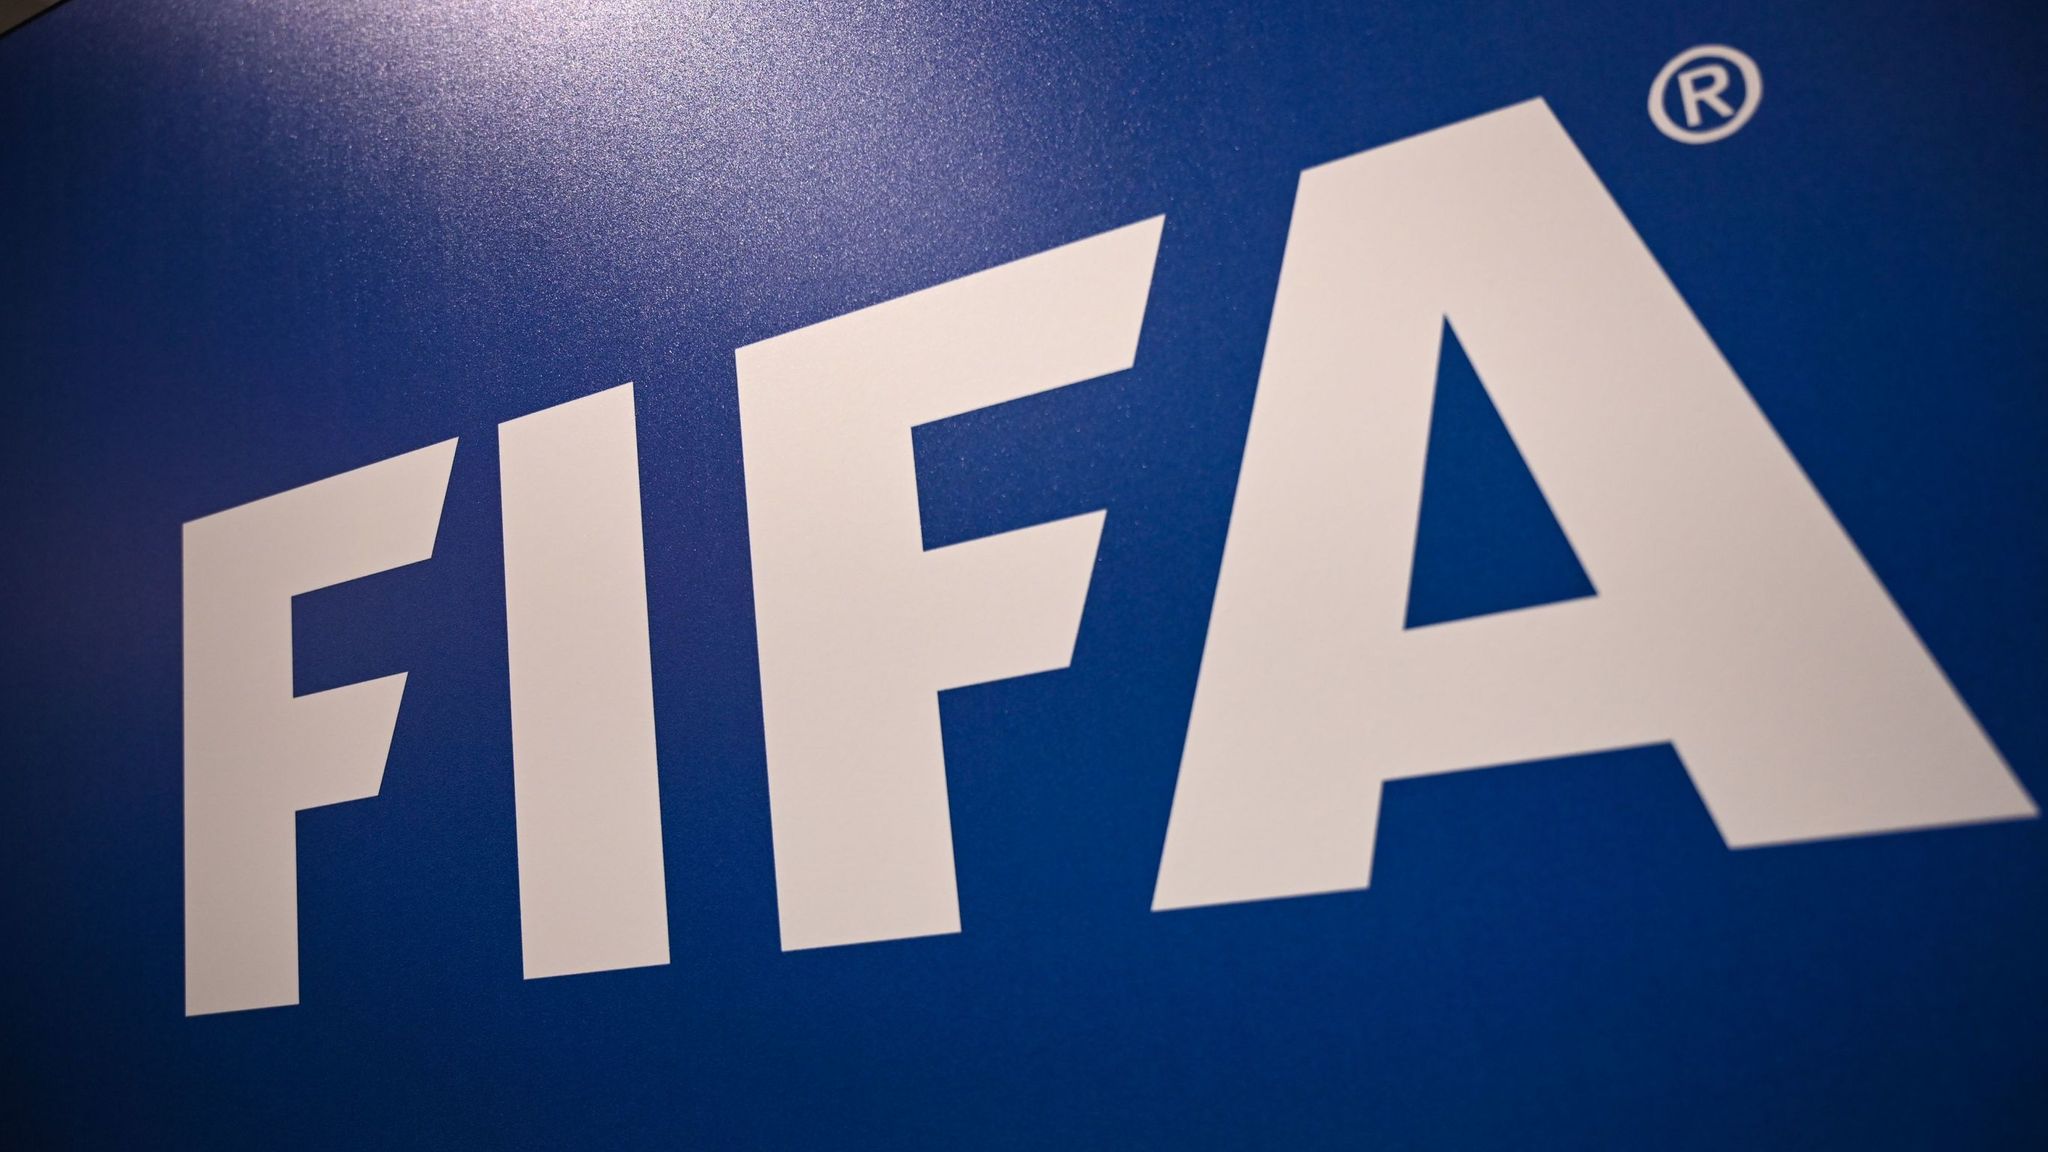 Russia-Ukraine War: Backlash in Europe as FIFA refuses to expel Russia from Football